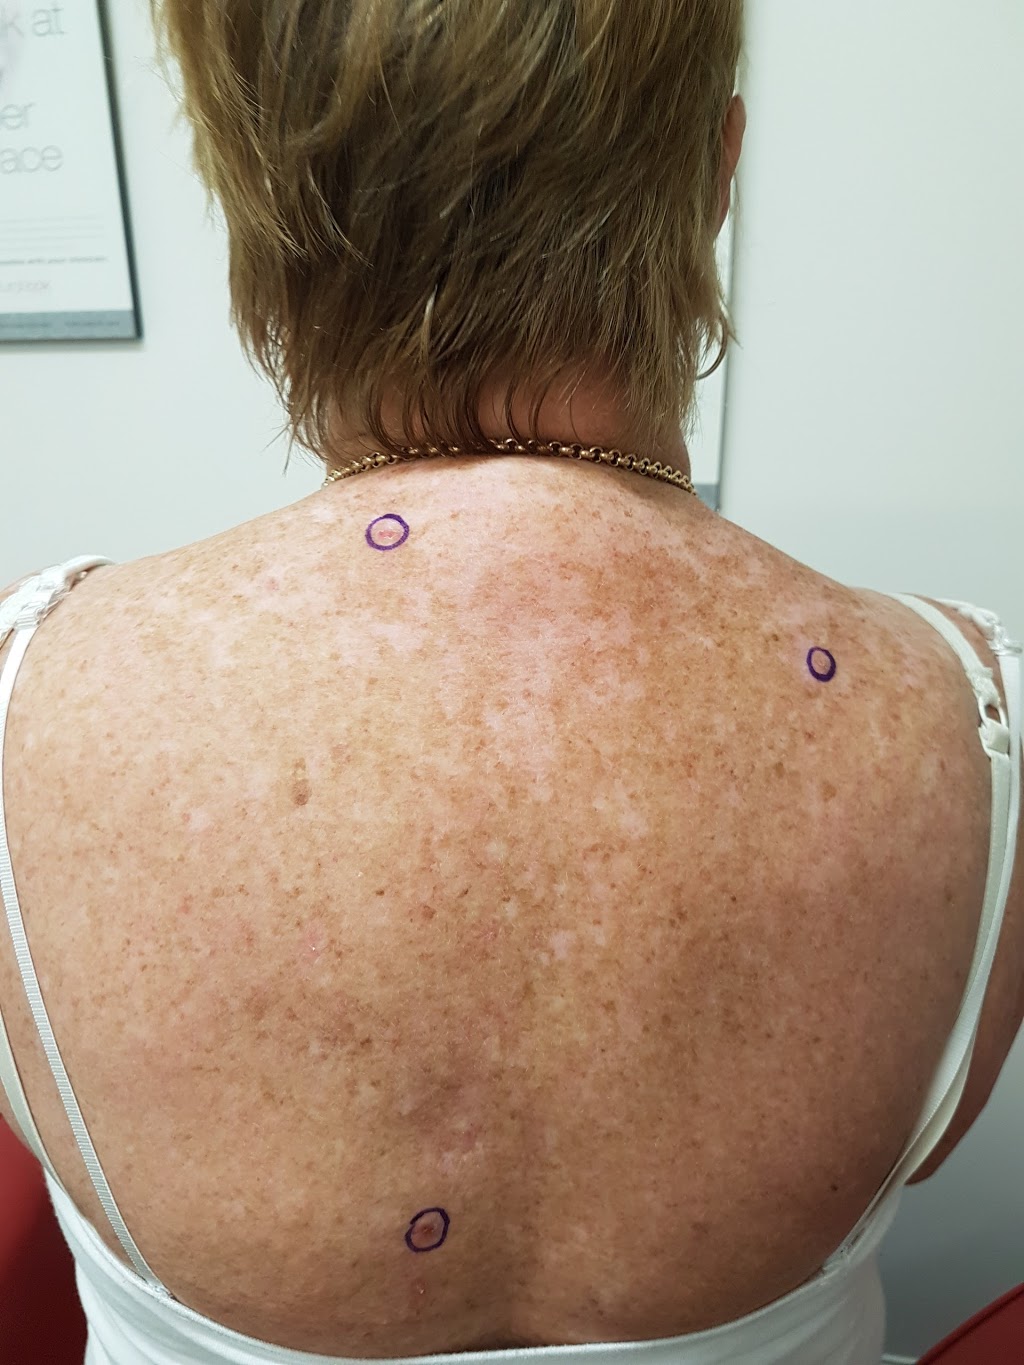 The Skin Spot Clinic | health | 1/123-125 Link Rd, Victoria Point QLD 4165, Australia | 0736678970 OR +61 7 3667 8970